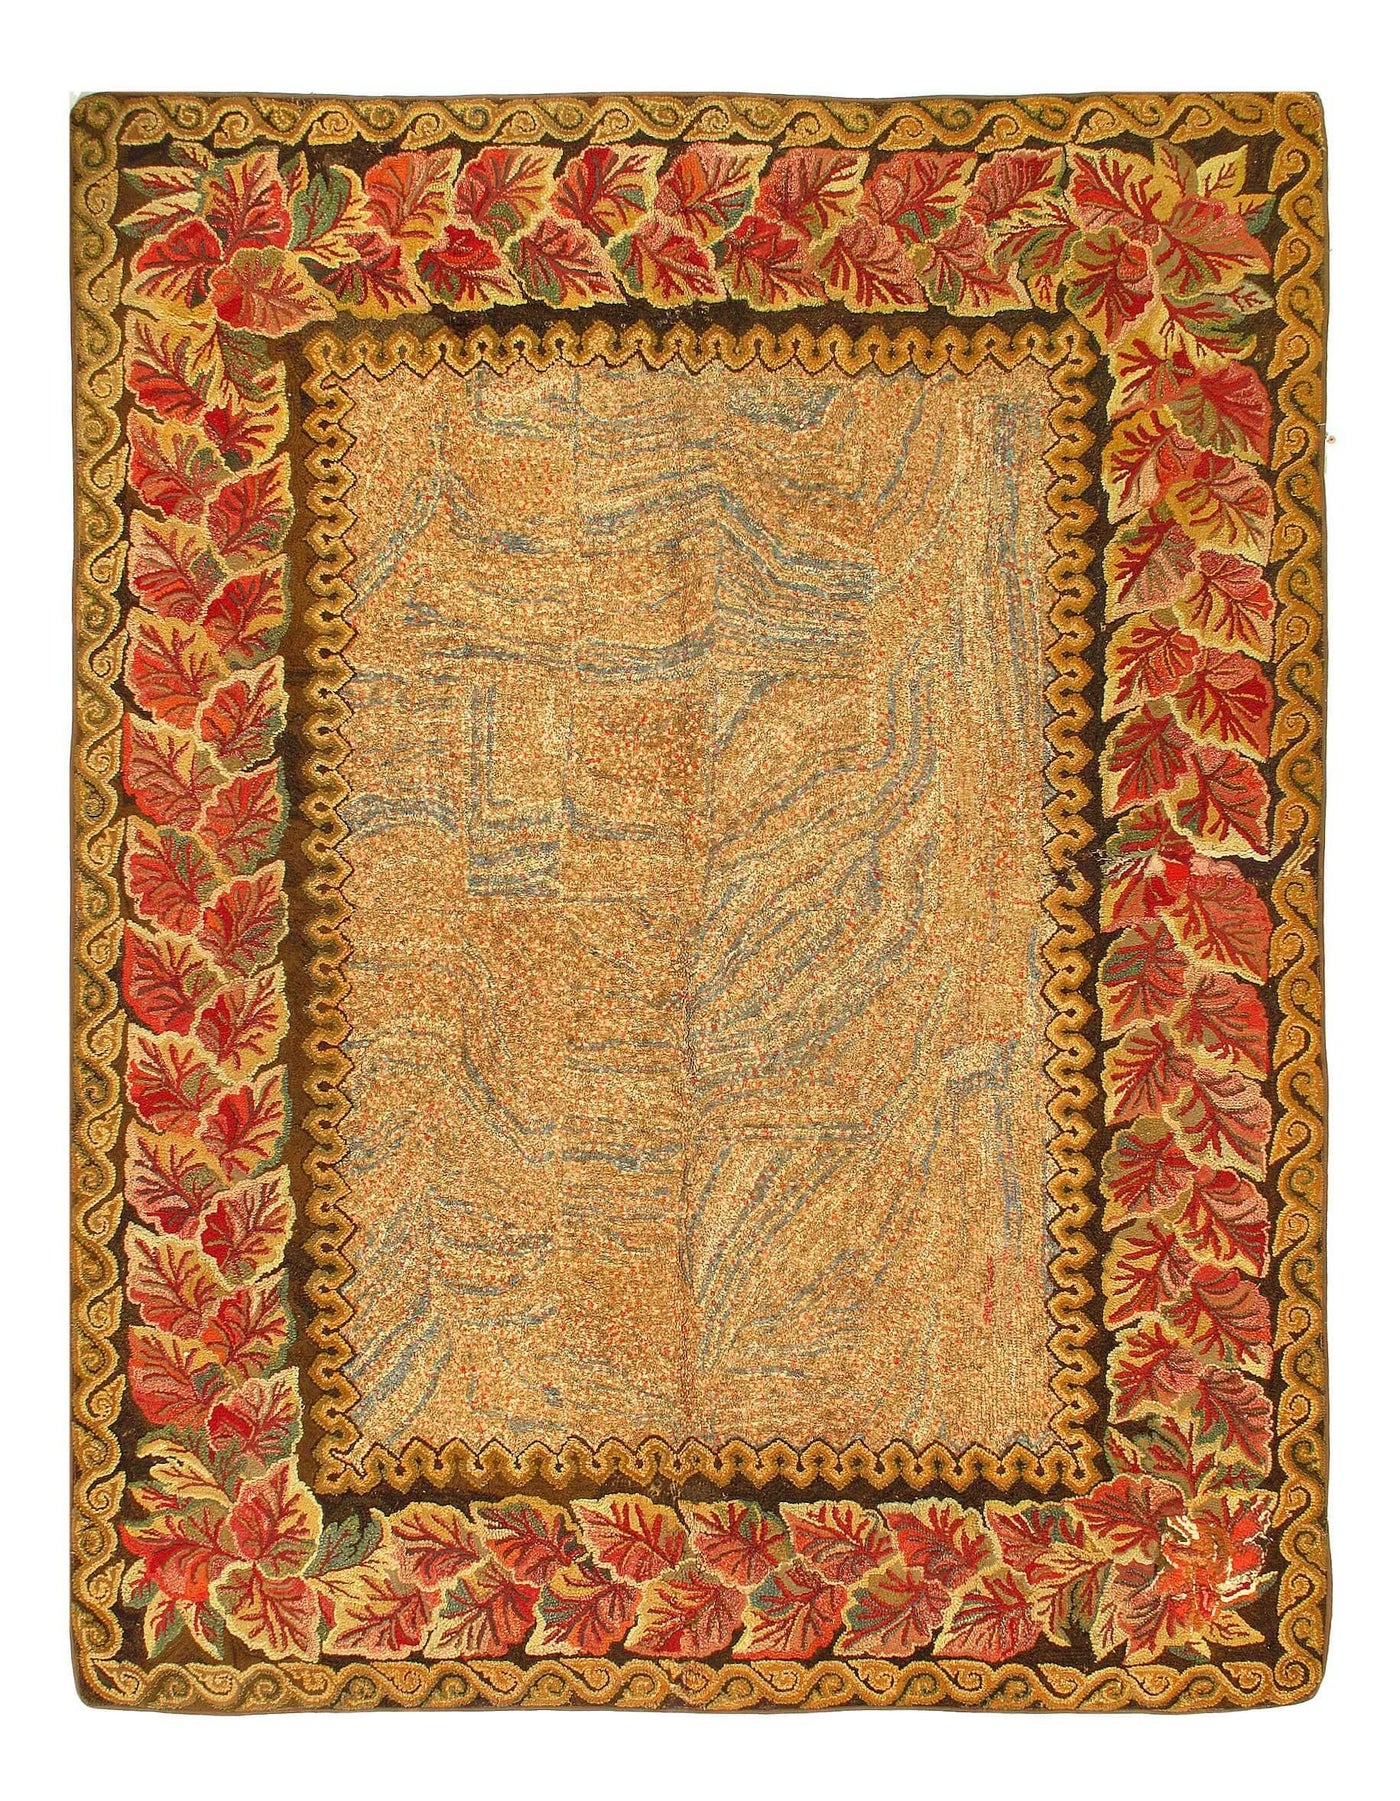 Canvello Antique American Yellow Hook Rug - 6'7'' X 8'9''